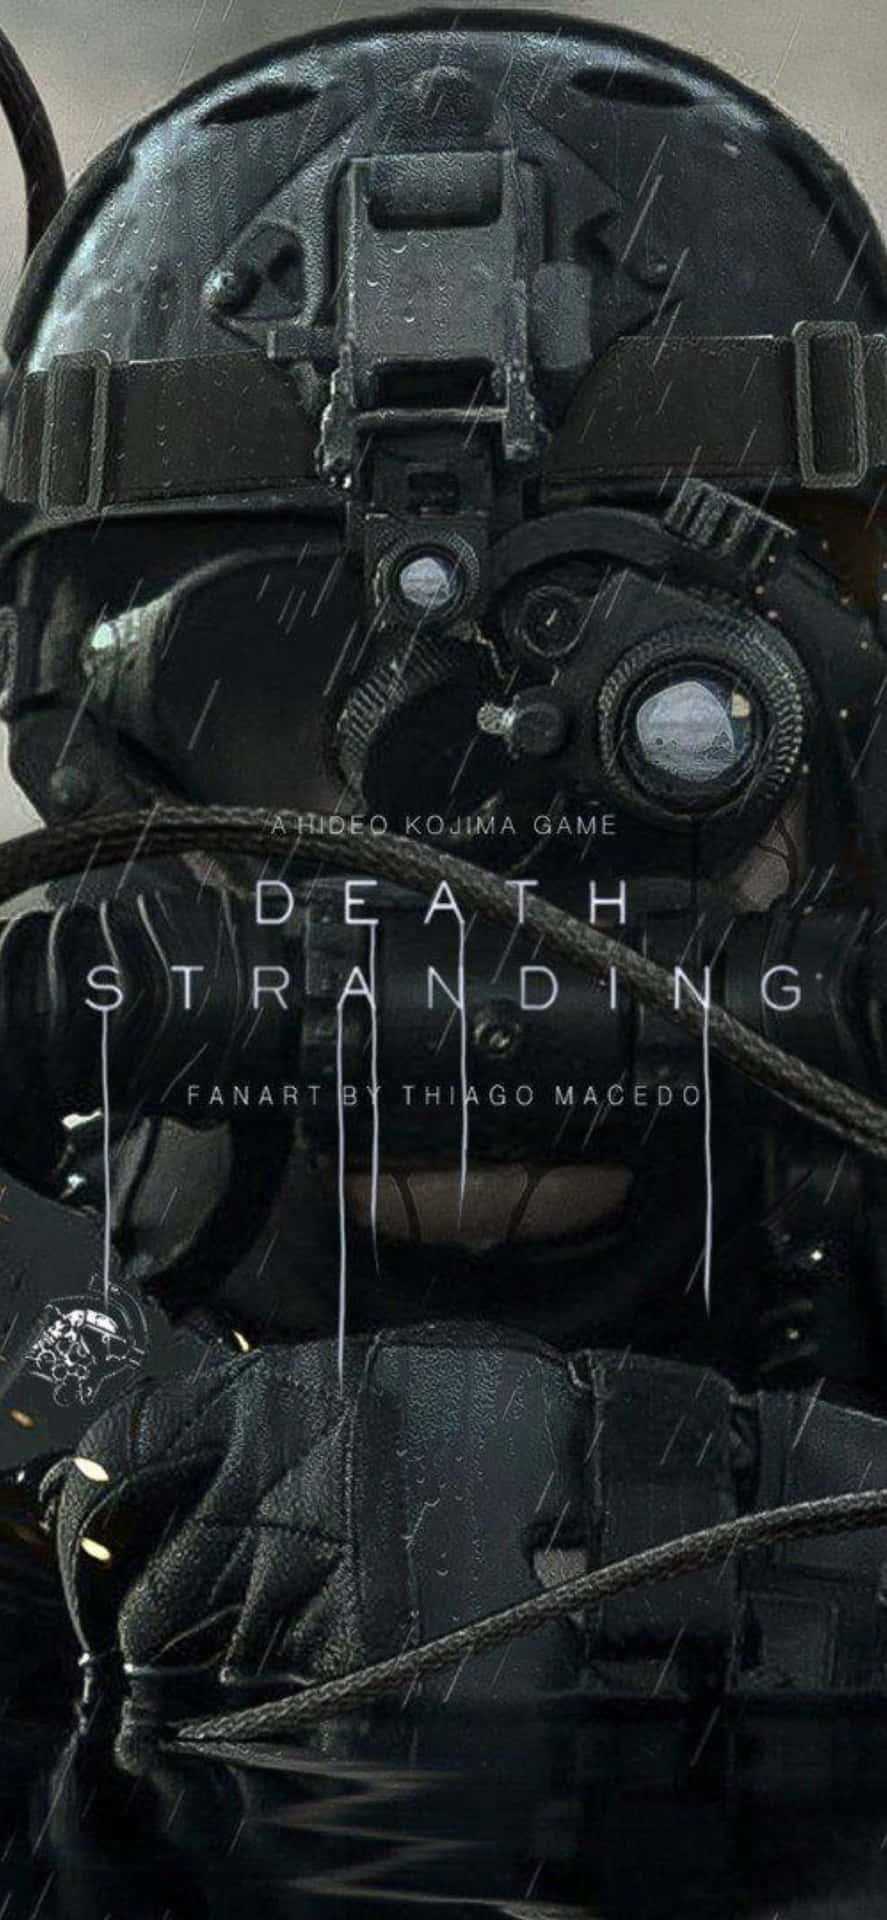 Get ready for a strange new journey with the Iphone XS Max&Death Stranding